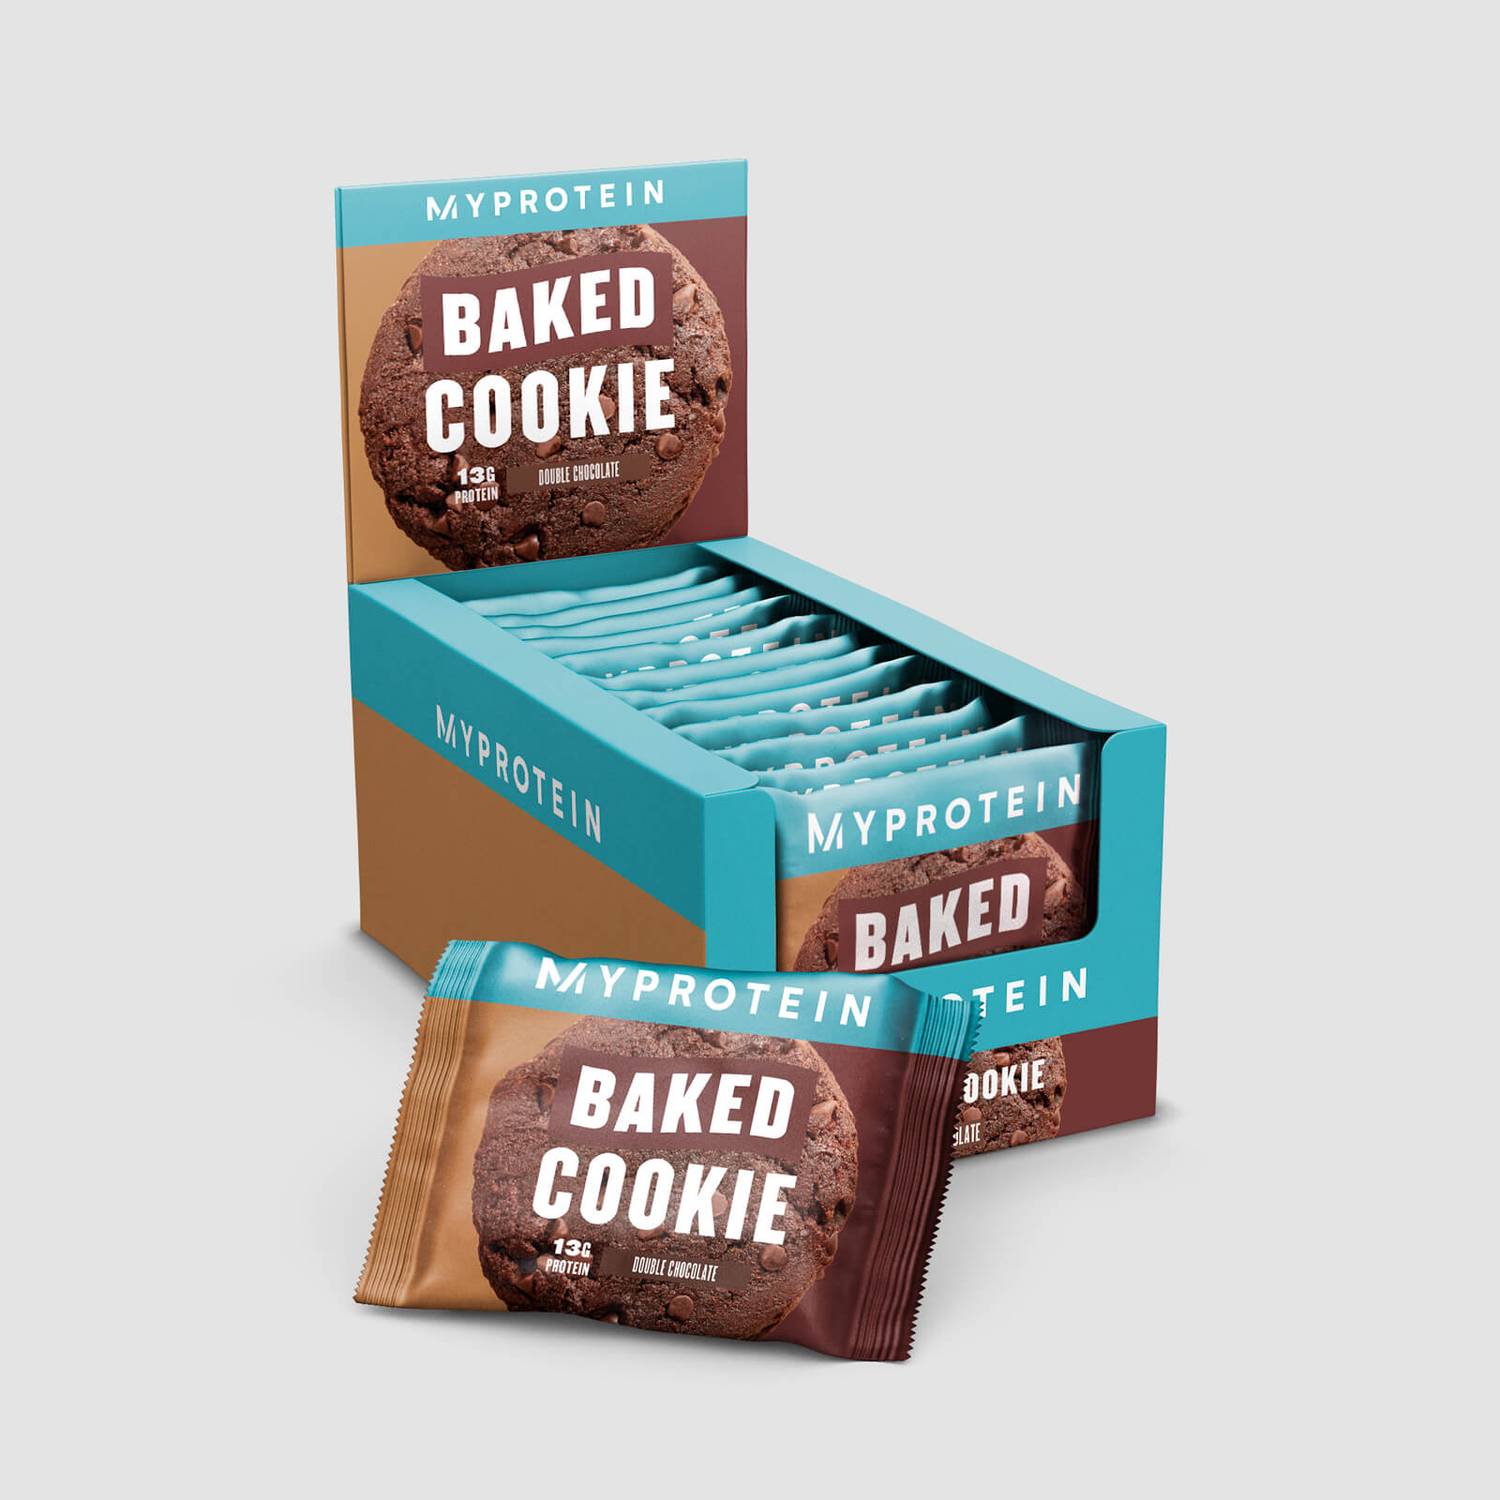 Myprotein Baked Cookie, Box of 12 - Nutristore